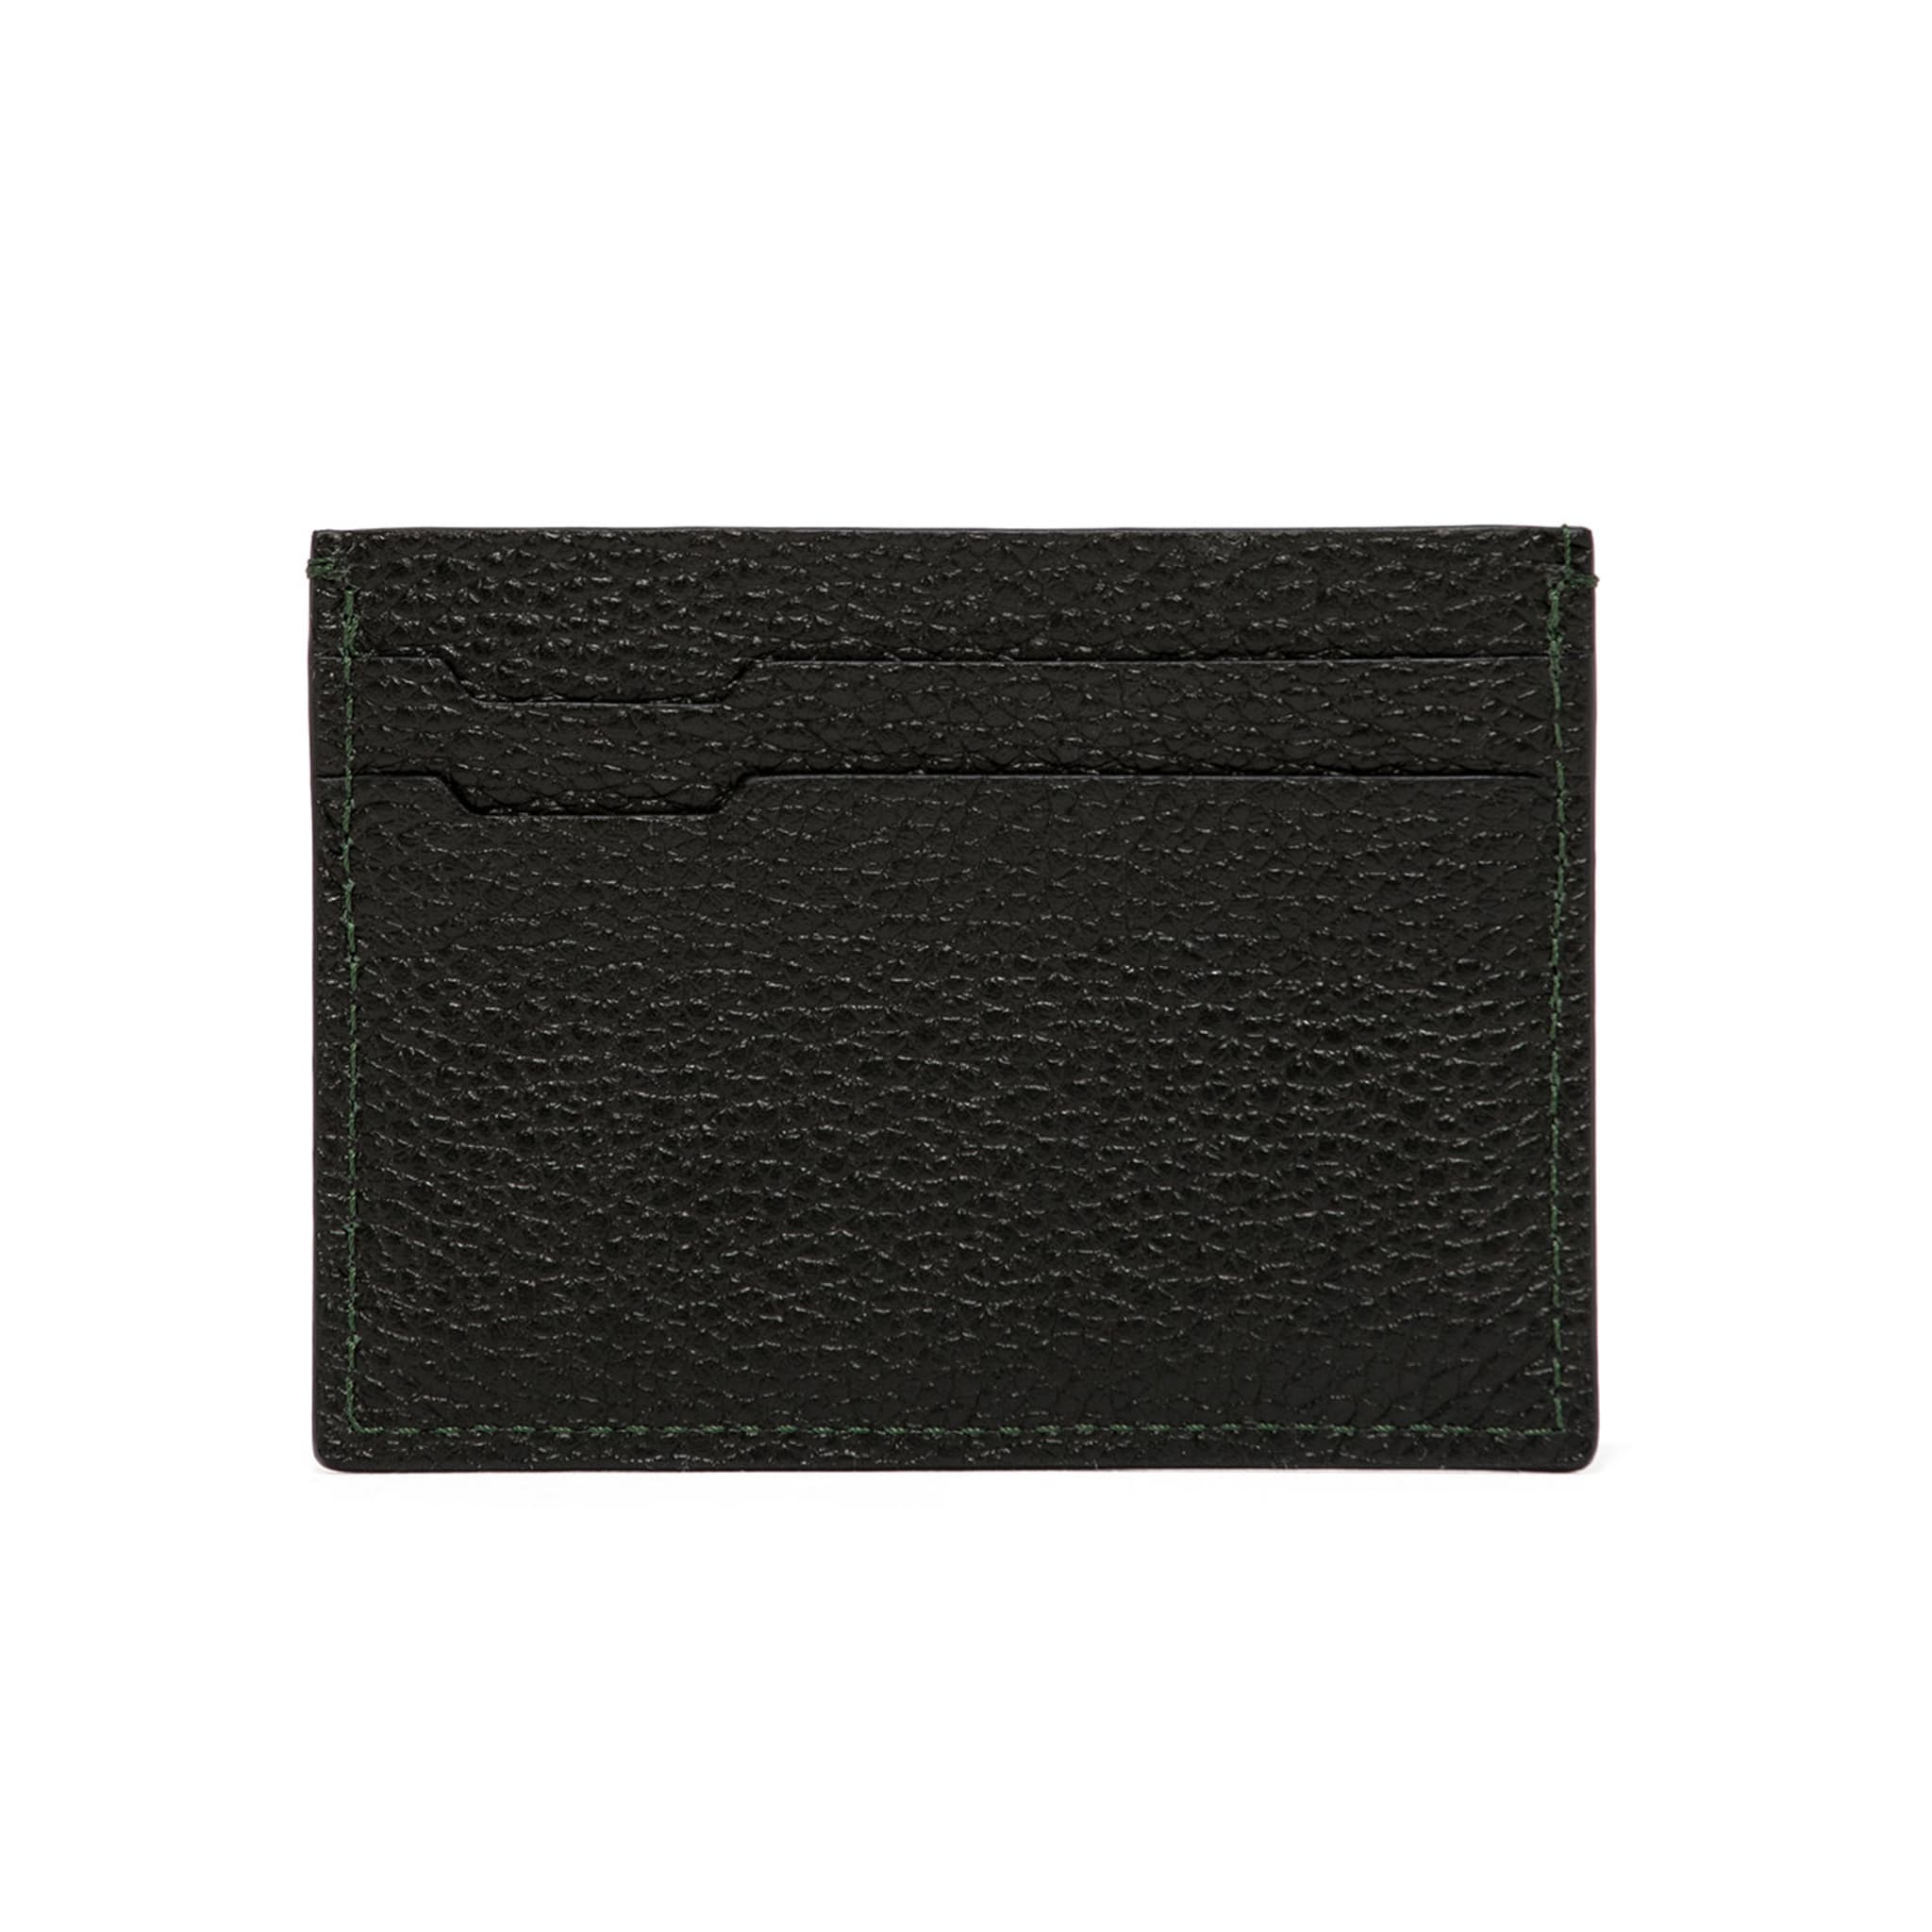 Grained Leather Card Holder Black - Alternative view 1